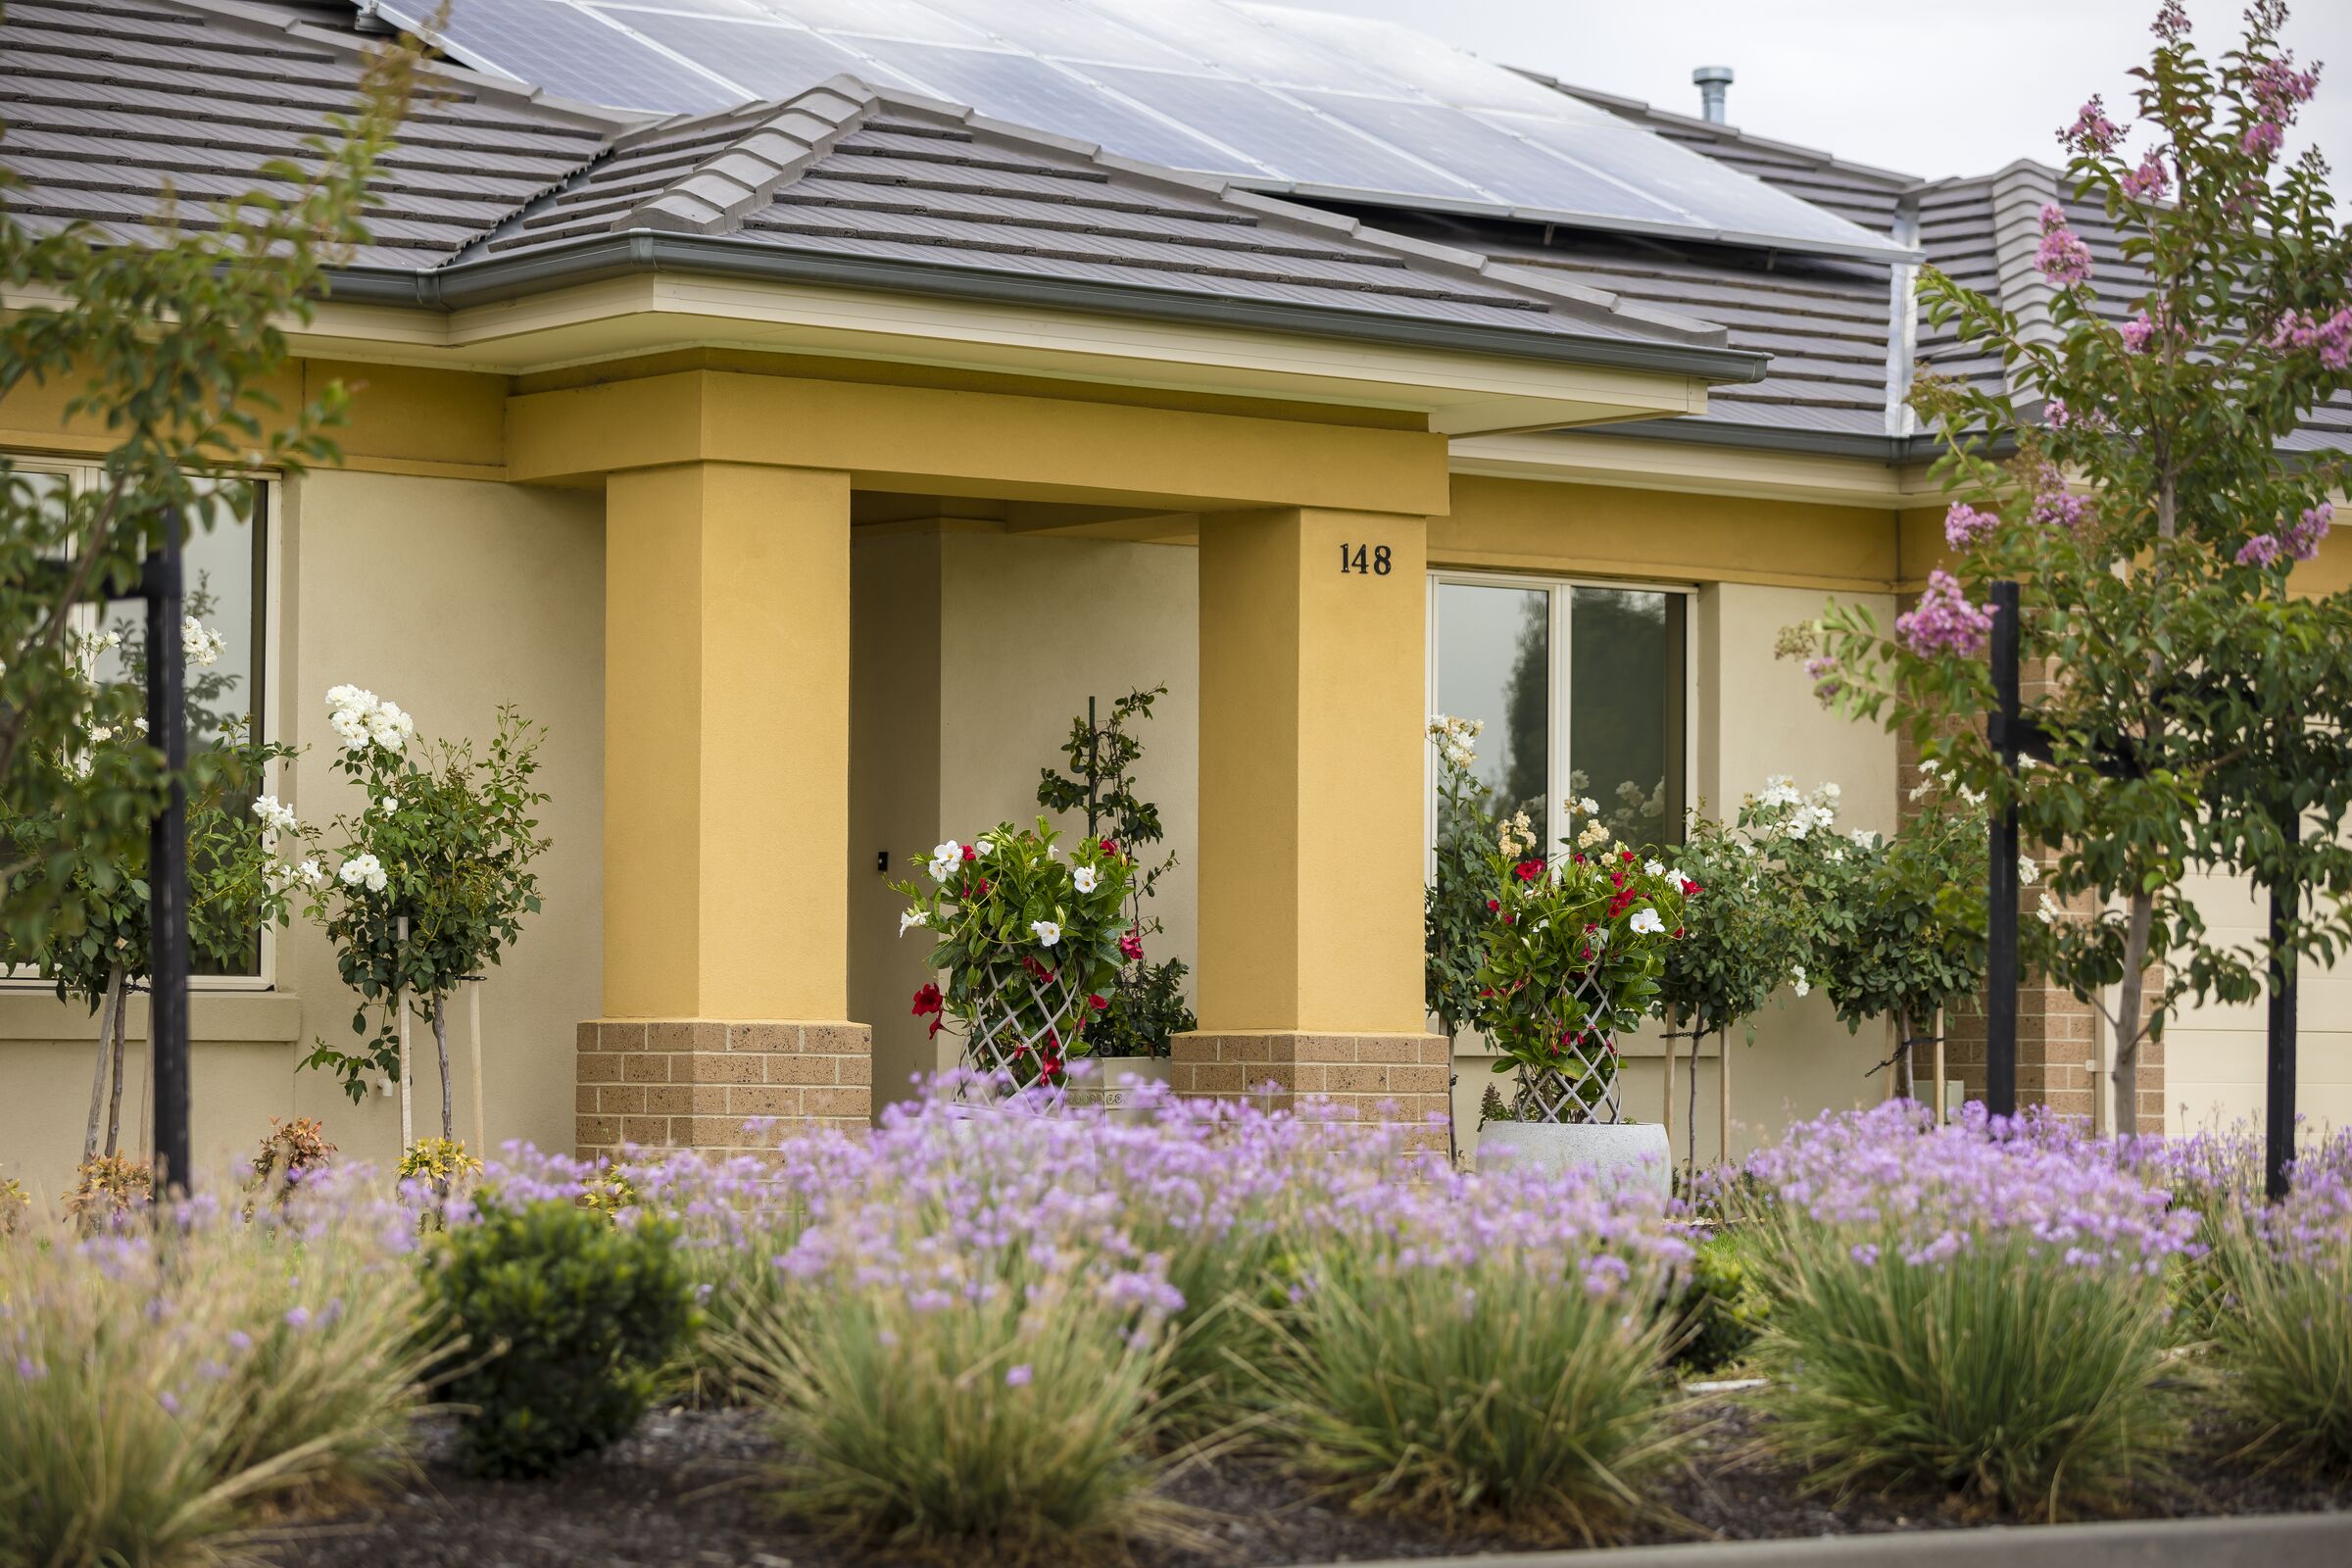 Waterford Park villa main entrance and gardens, solar panels on roof